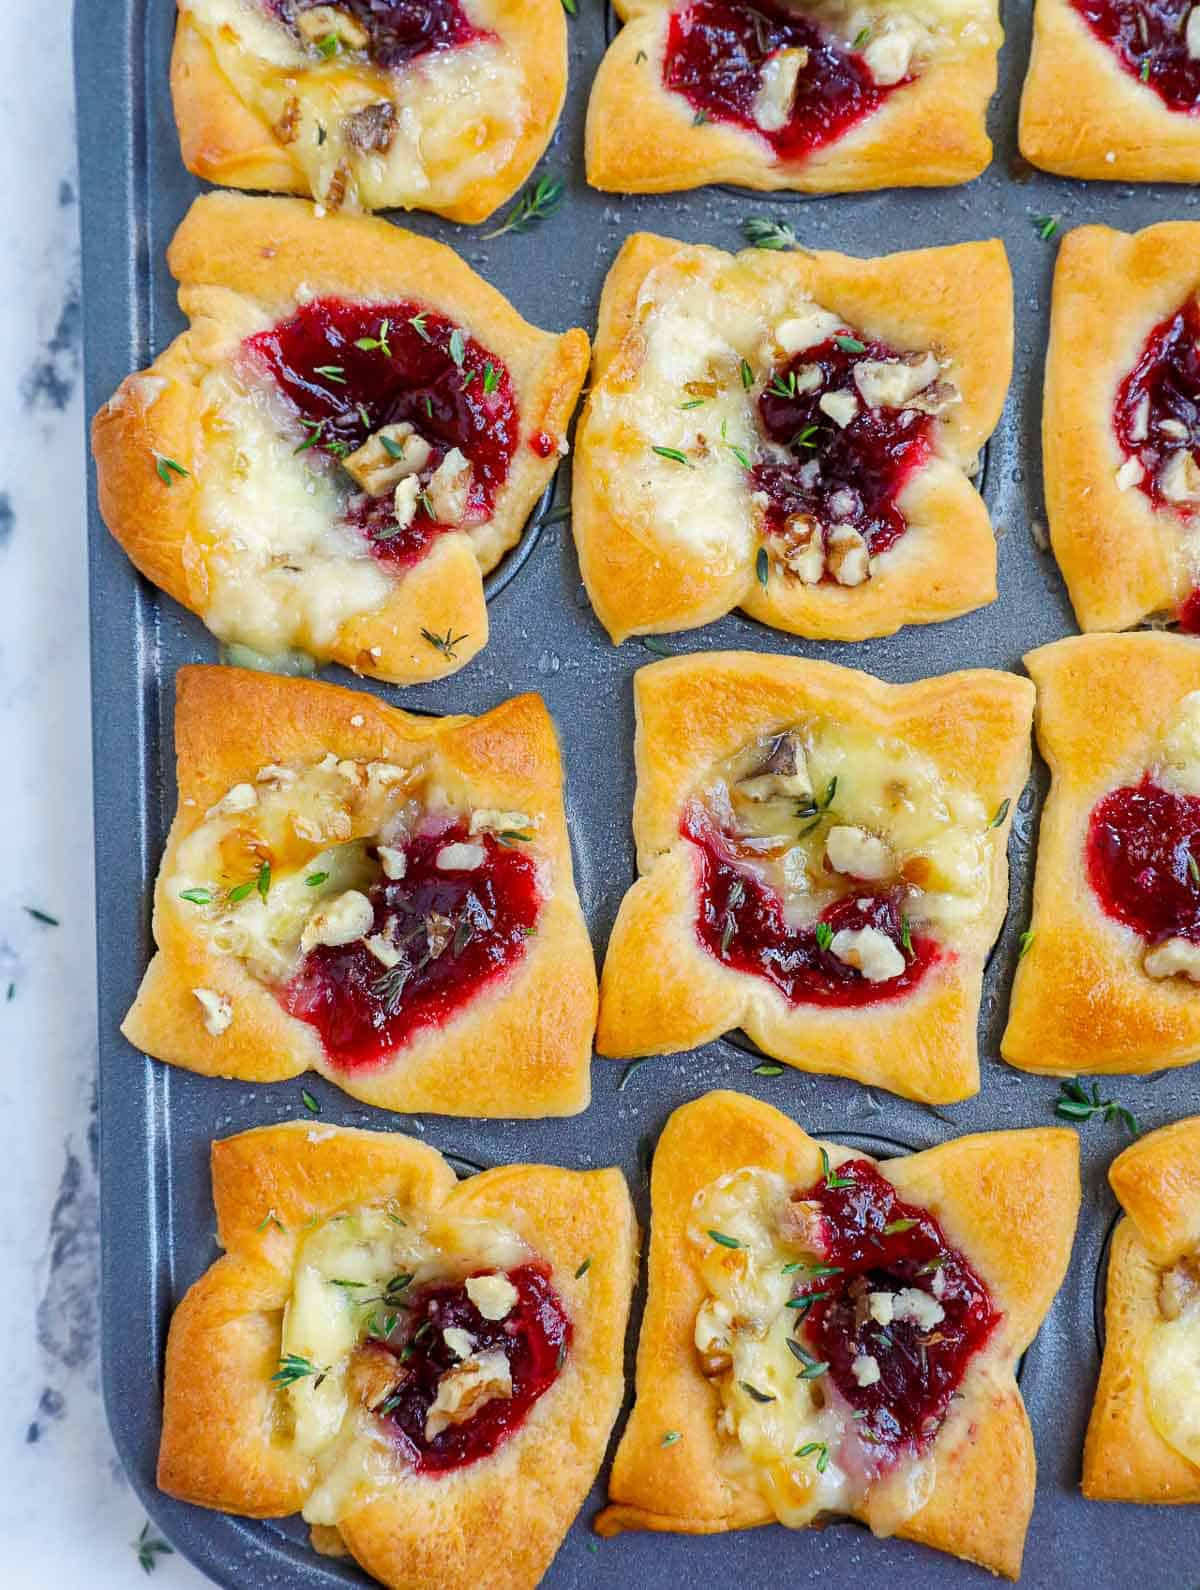 Cranberry and brie bites after baking in a tin pan.